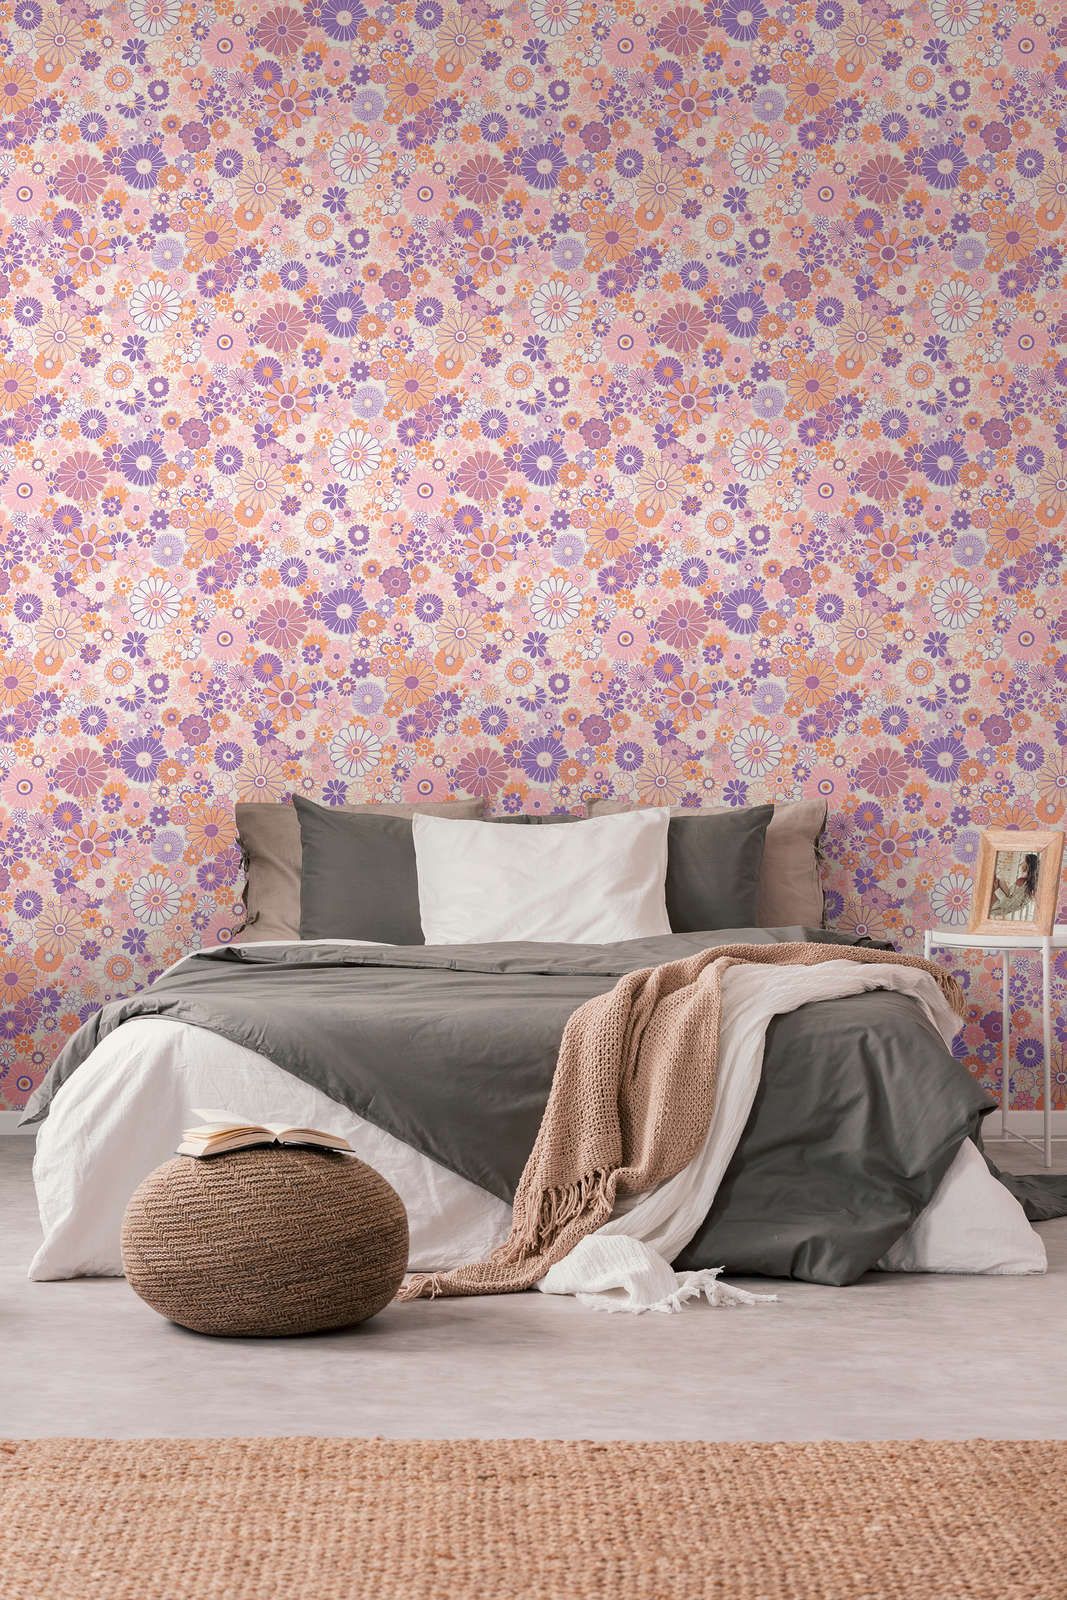             Lightly textured non-woven wallpaper with floral pattern - purple, orange, pink
        